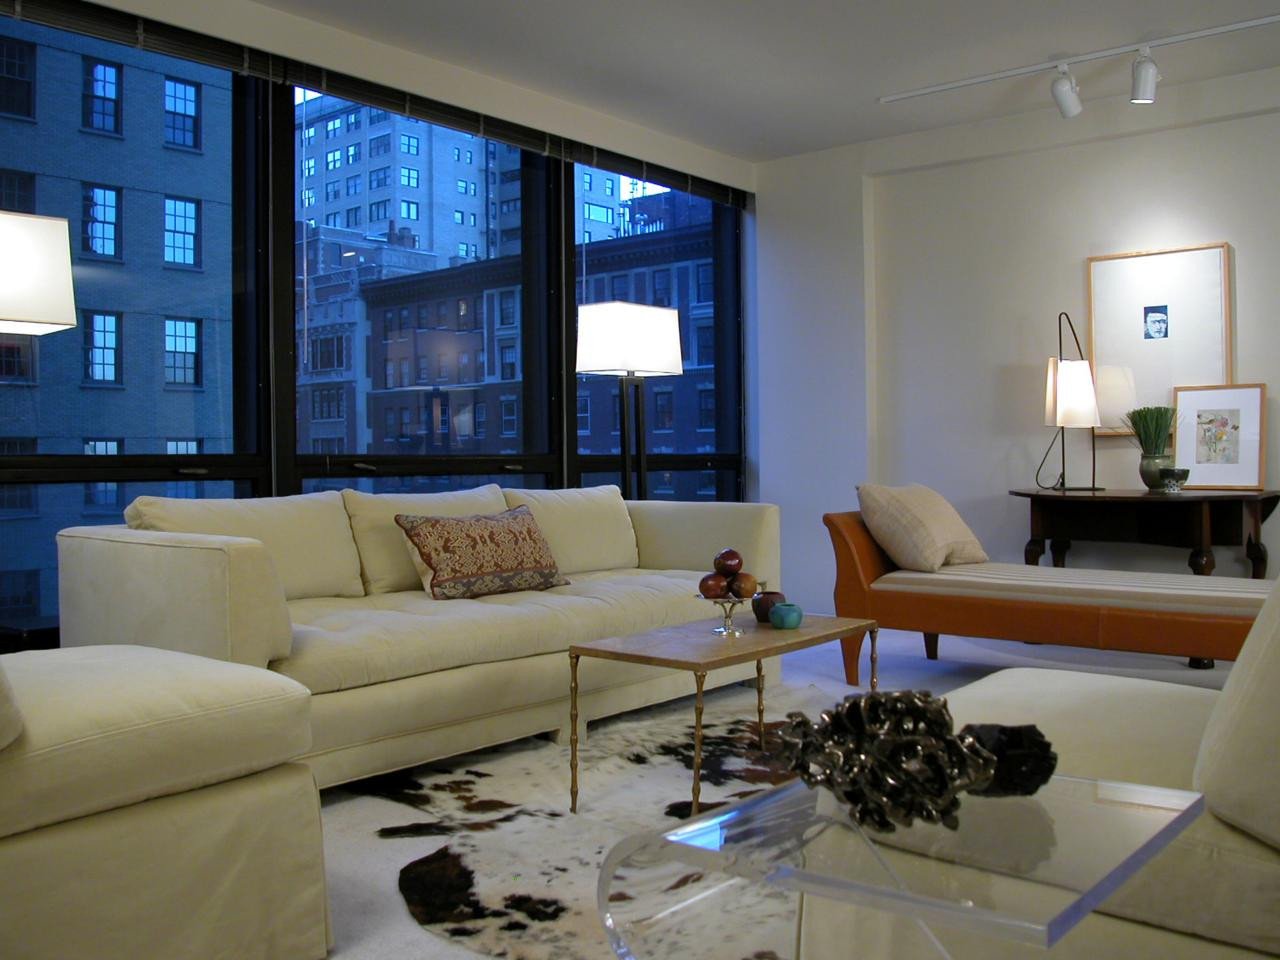 Contemporary Living Room Lamps Lighting Tips for Every Room